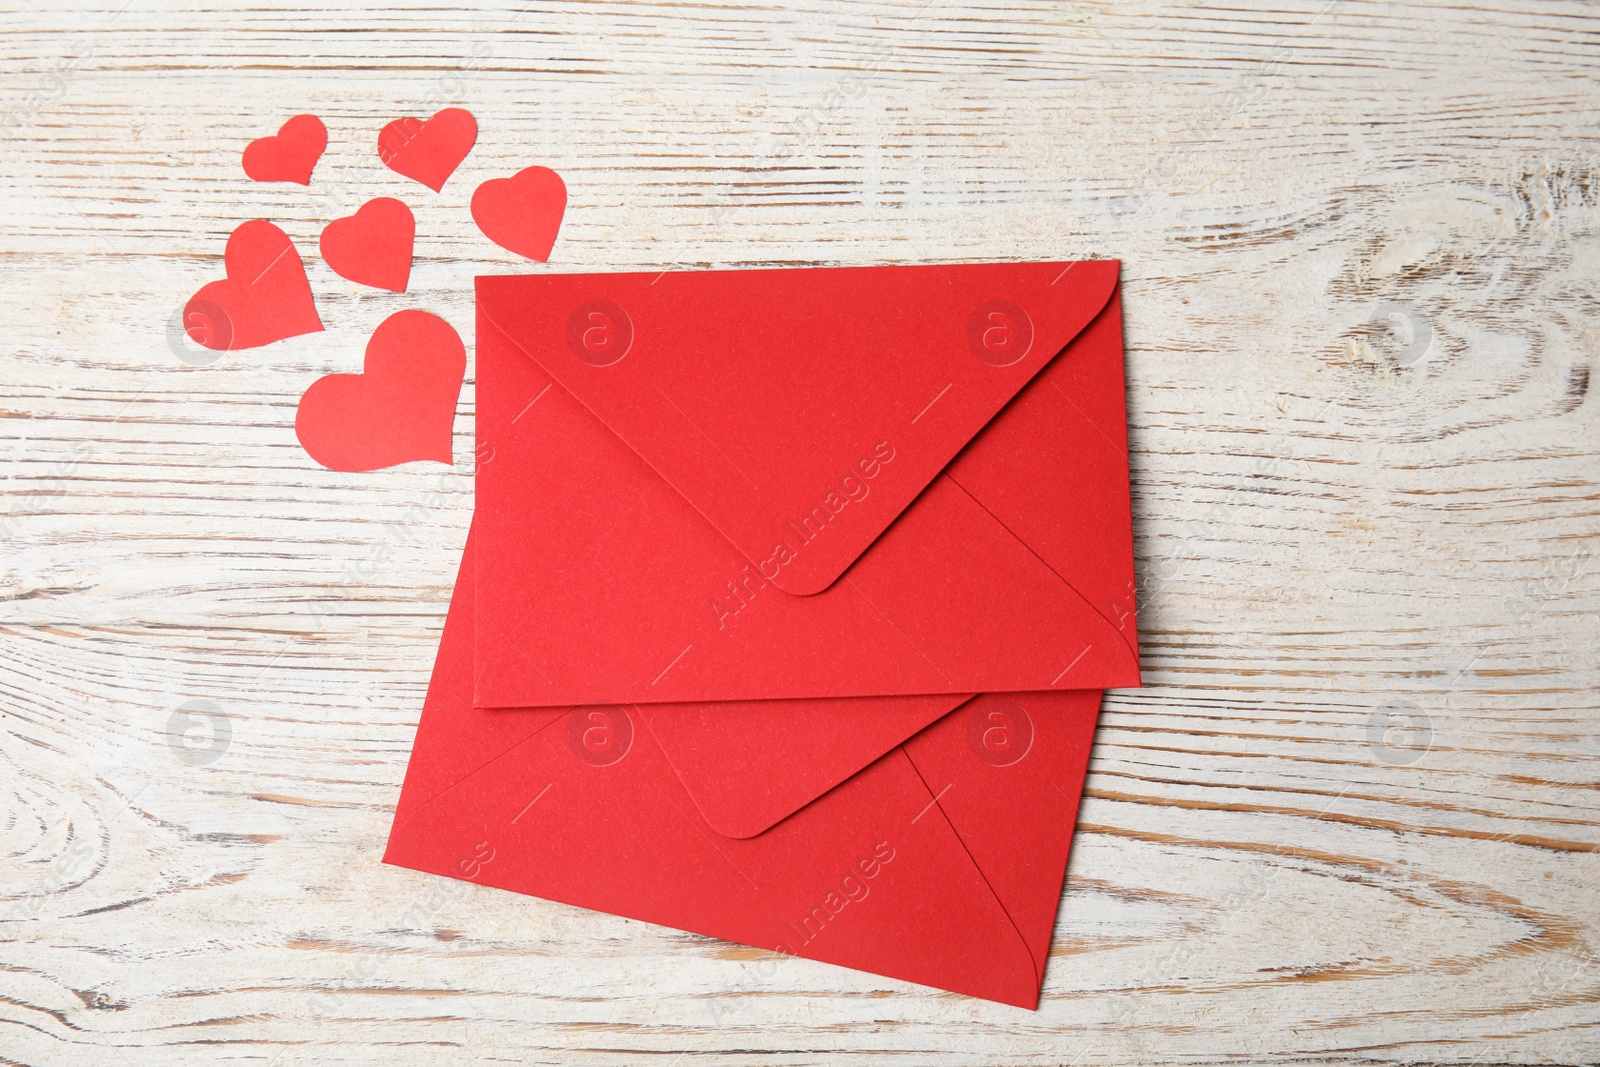 Photo of Red envelopes and paper hearts on white wooden table, flat lay. Love letters